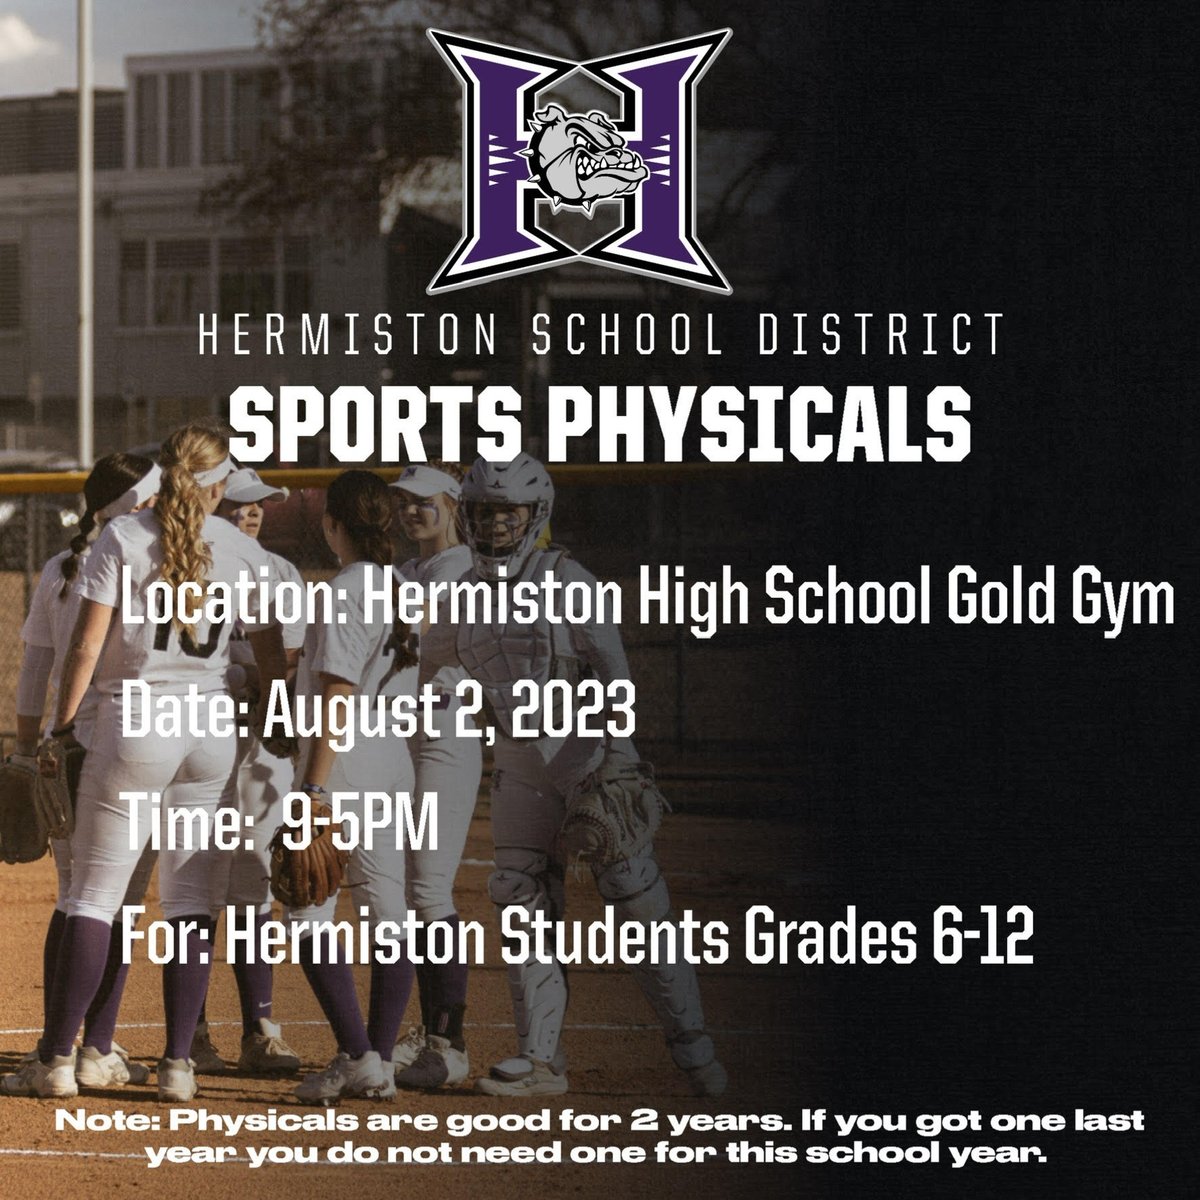 Mark this date on your calendar! The sports physicals will be free of charge for Hermiston School District students.